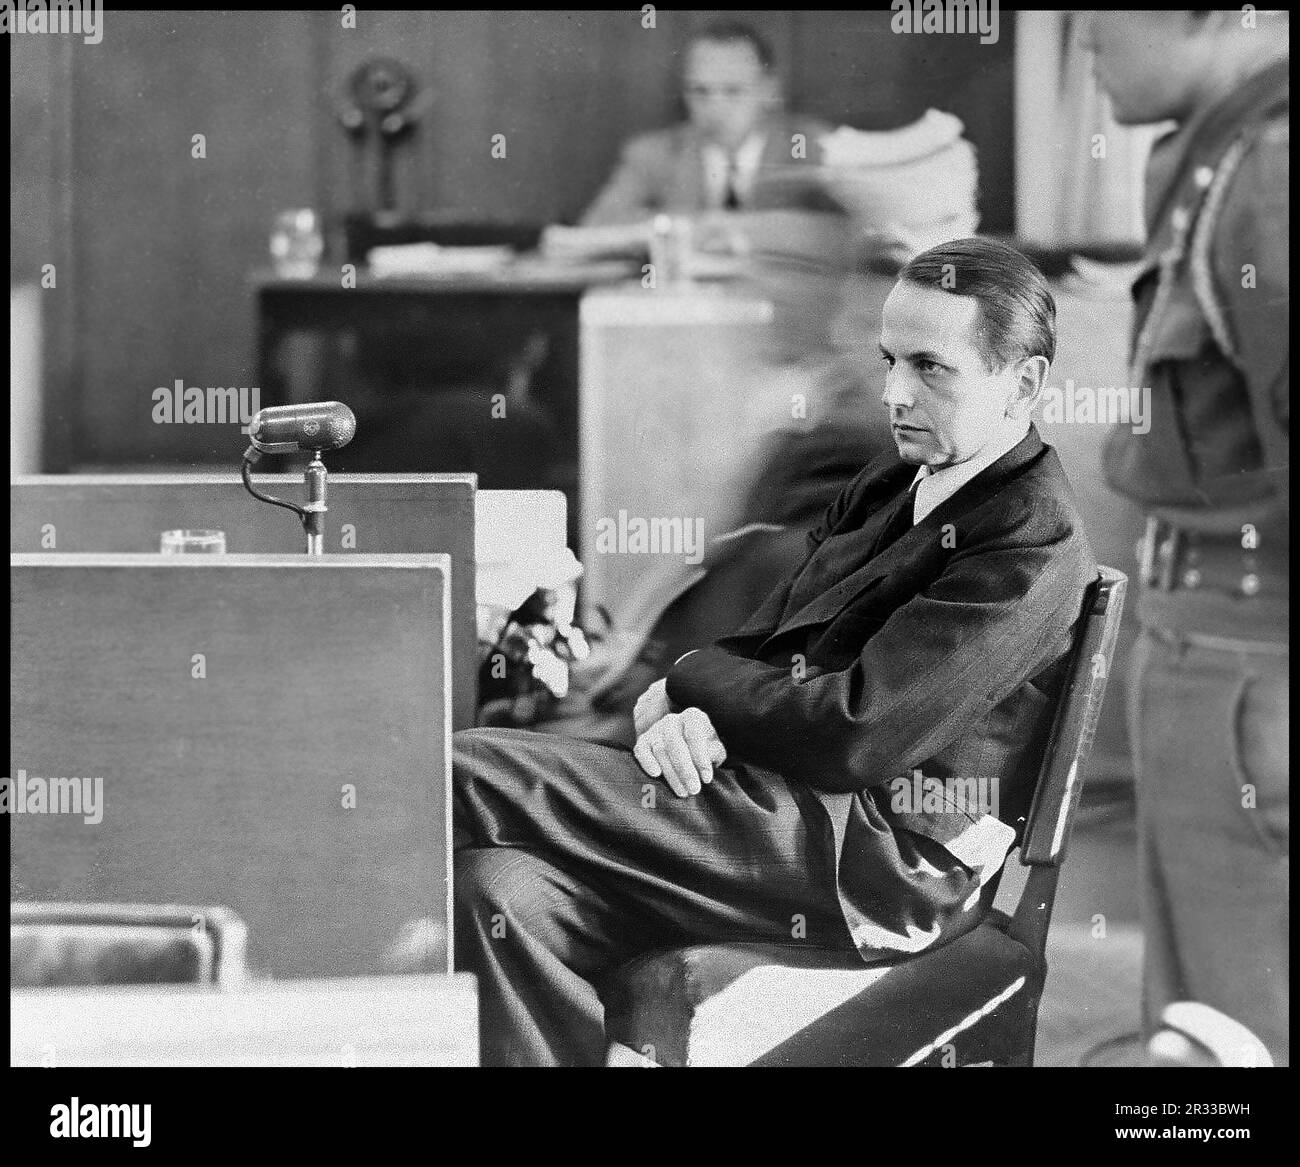 Defendant Otto Ohlendorf testifies on his own behalf at the Einsatzgruppen Trial. Nuremberg Trials 1950 Otto Ohlendorf was a German SS functionary and Holocaust perpetrator during the Nazi era. An economist by education, he was head of the Sicherheitsdienst Inland, responsible for intelligence and security within Germany.  Born: 4 February 1907, Hoheneggelsen, Söhlde, Germany Died: 7 June 1951, Landsberg Prison, Landsberg am Lech, Germany Nationality: German Party: Nazi Party Education: Leipzig University Conviction(s): Crimes against humanity; War crimes; Membership in a criminal organization Stock Photo